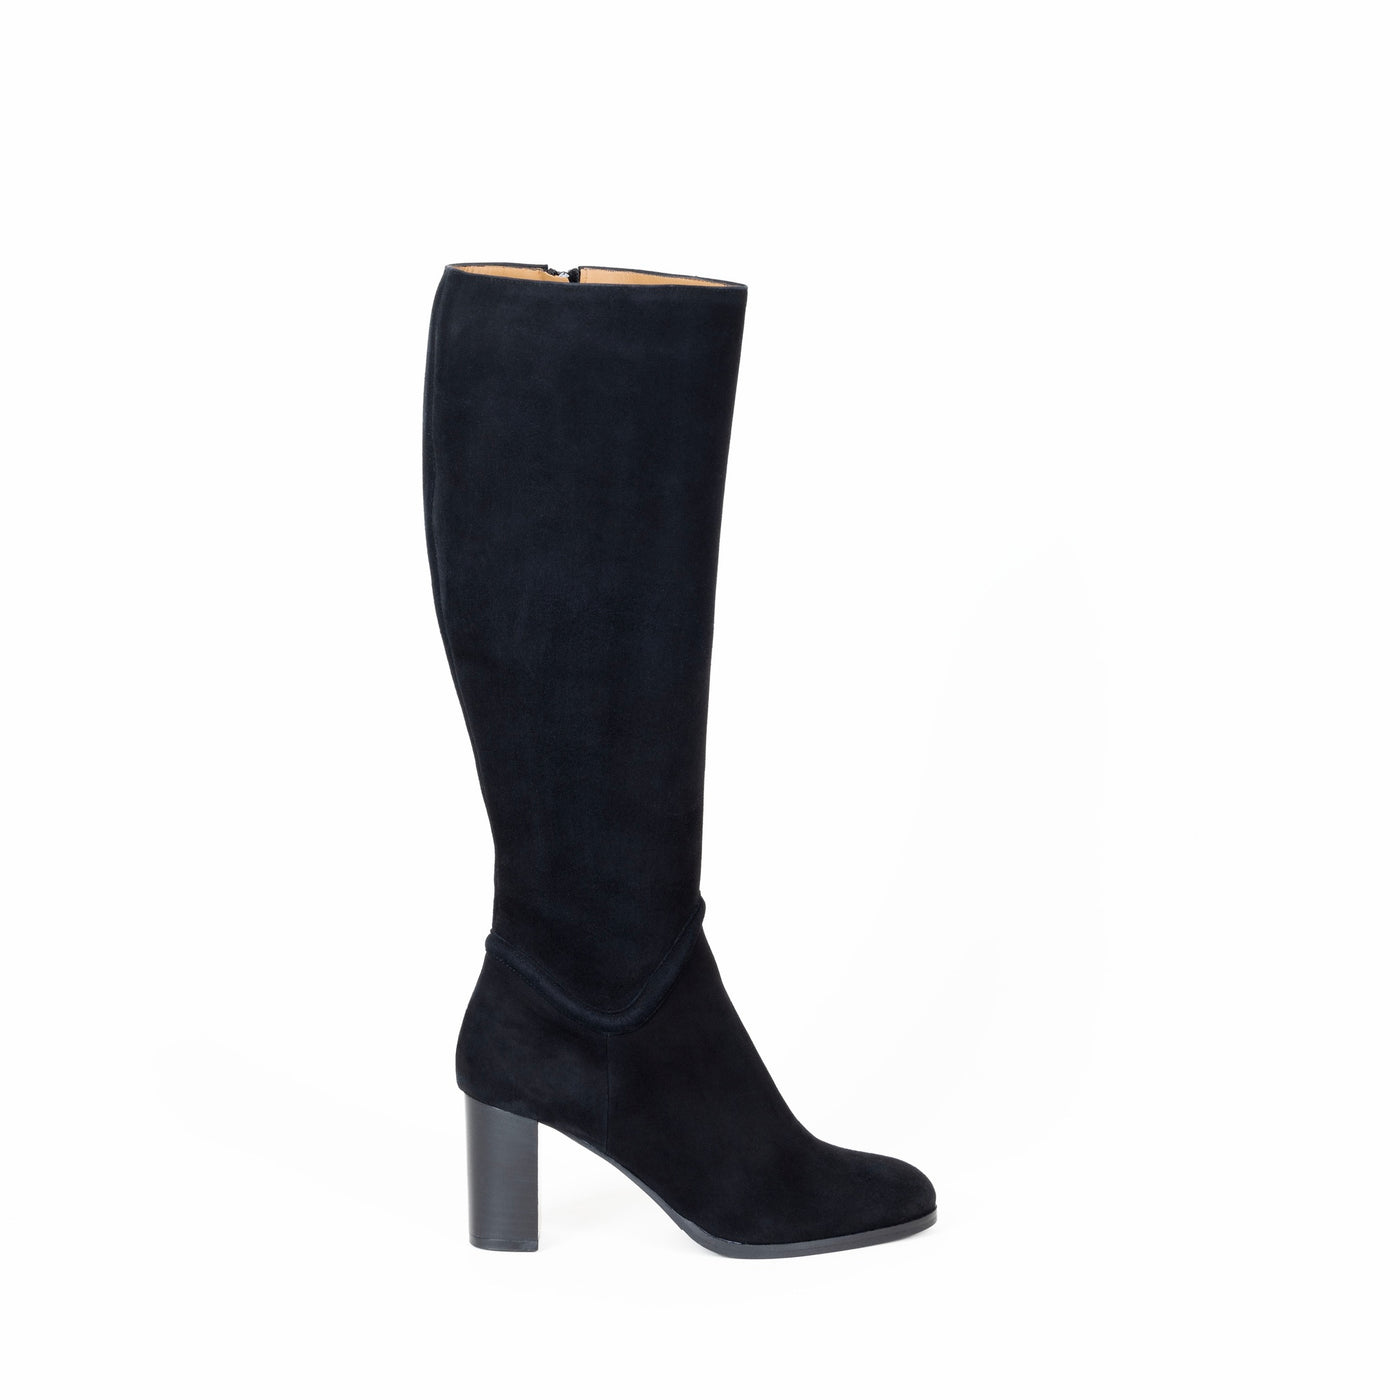 Paula Knee High Boots in Black Suede